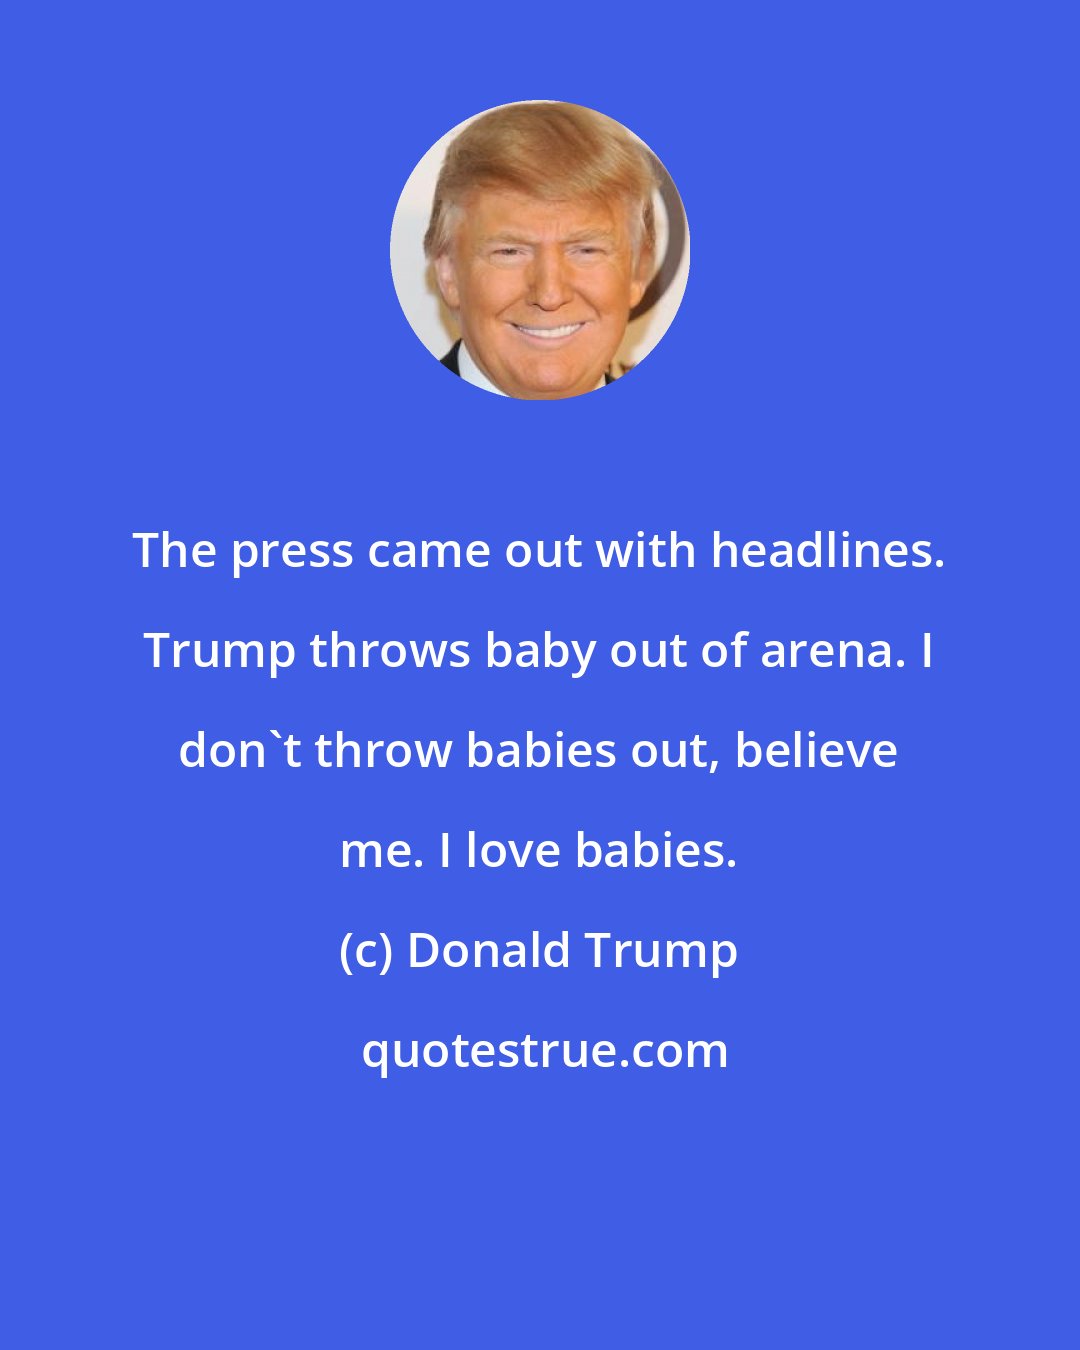 Donald Trump: The press came out with headlines. Trump throws baby out of arena. I don't throw babies out, believe me. I love babies.